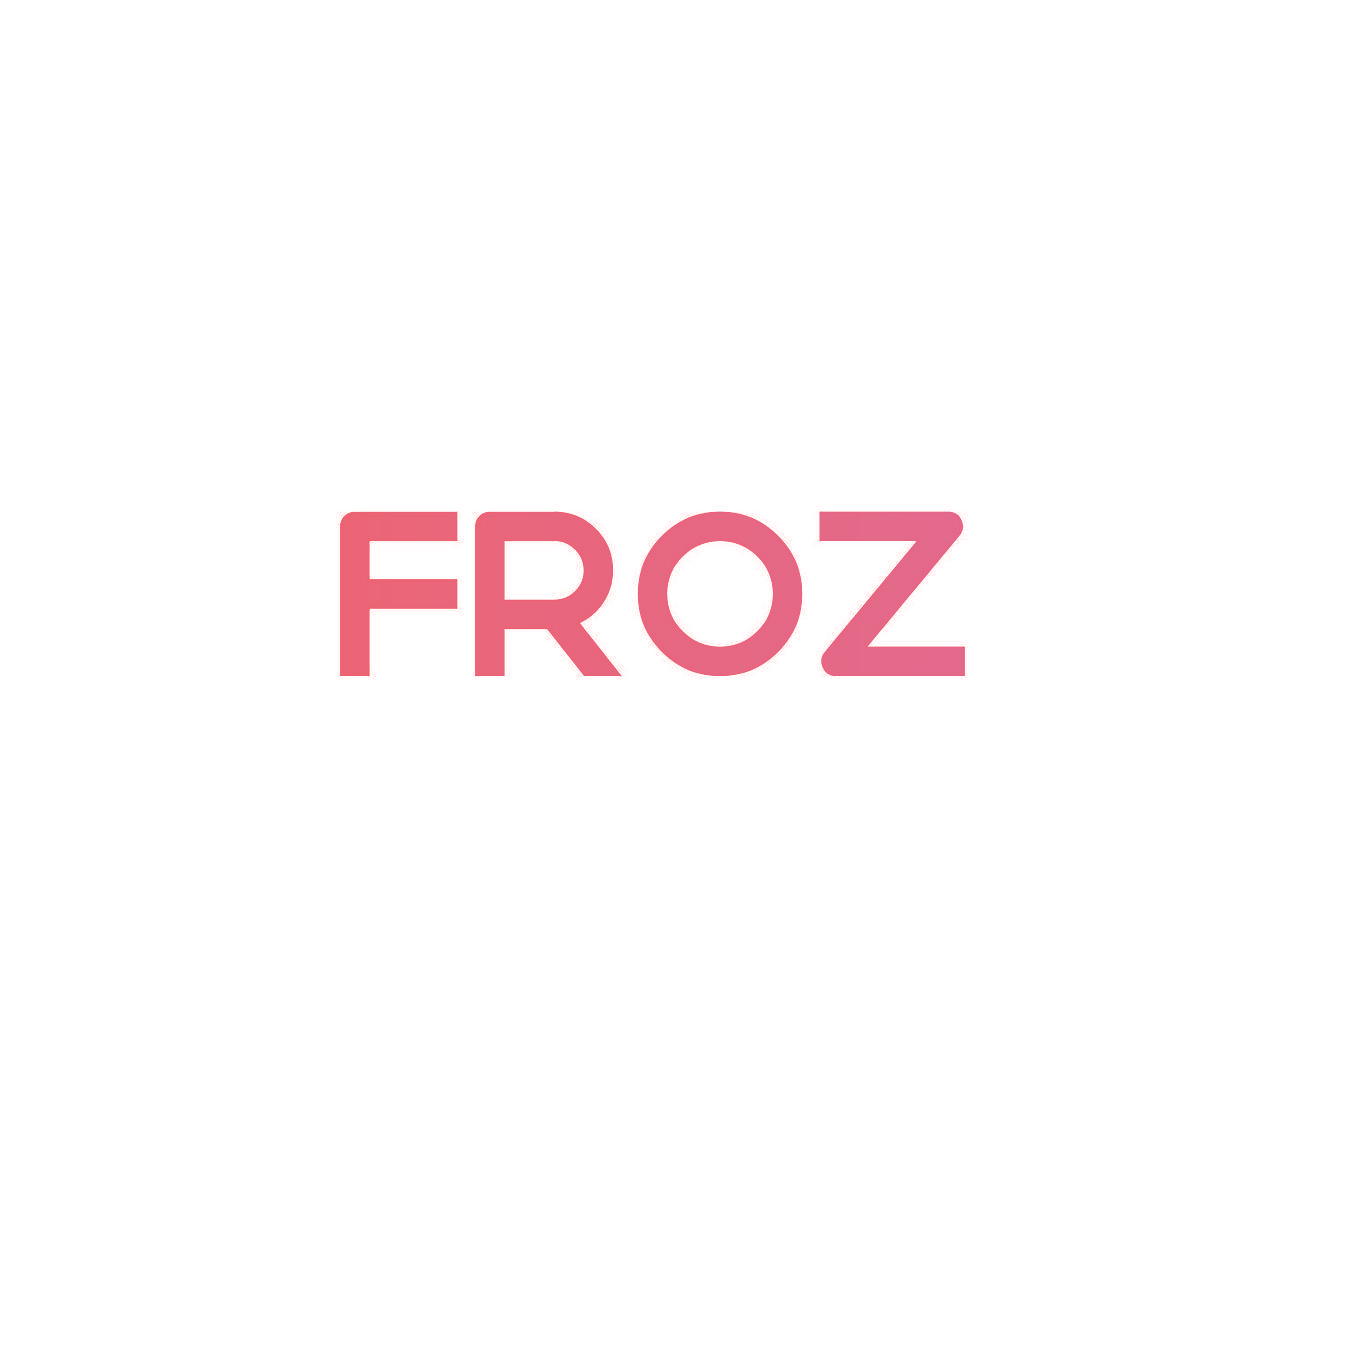 FROZ